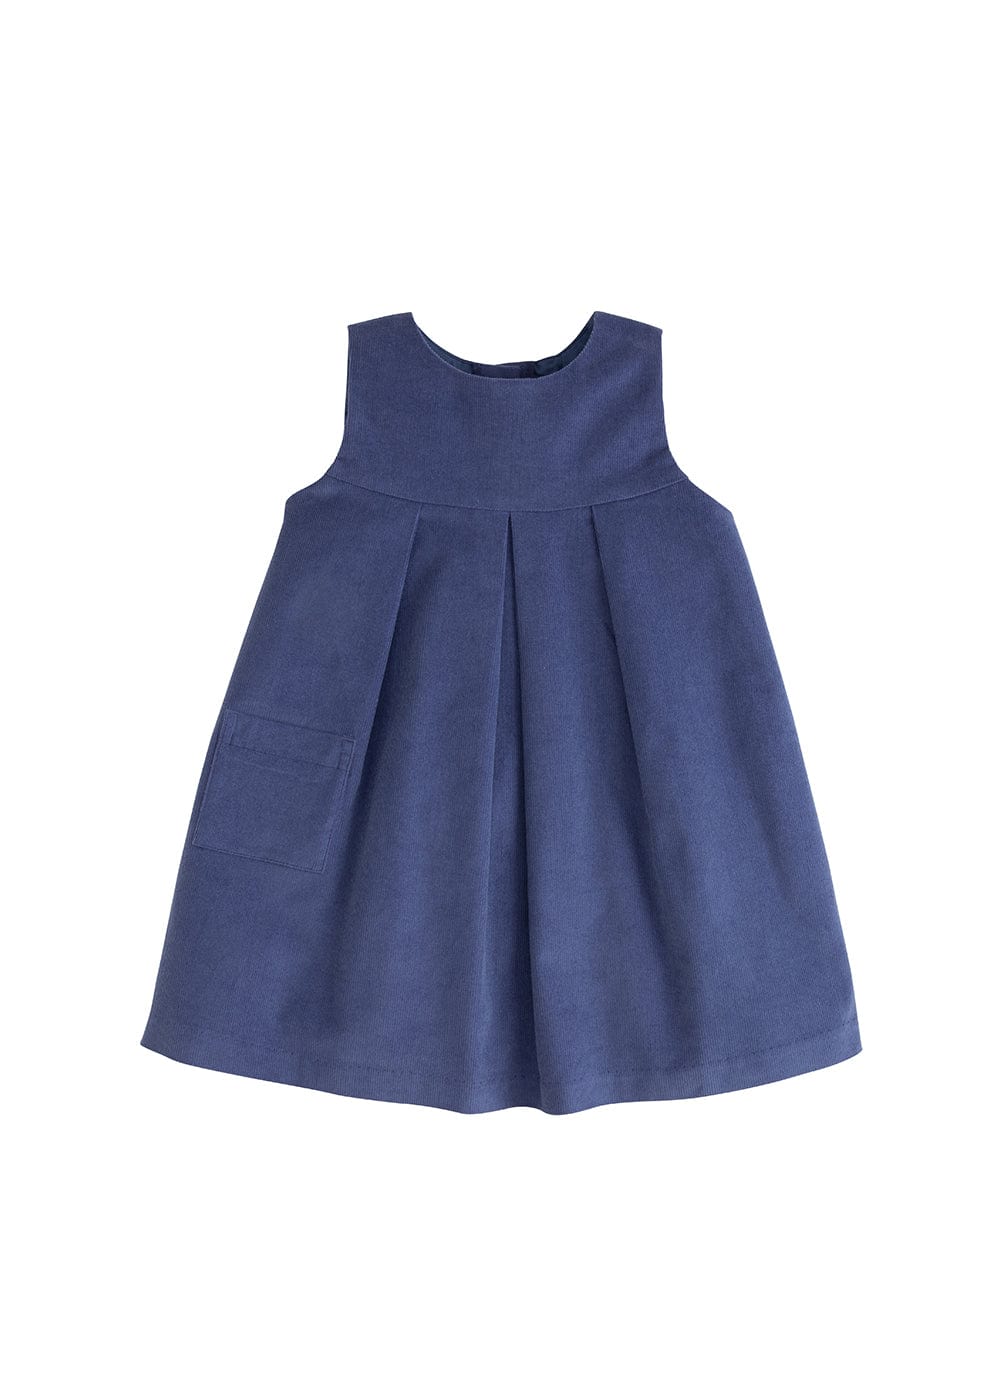 classic childrens clothing little girls jumper with pleats in gray blue corduroy